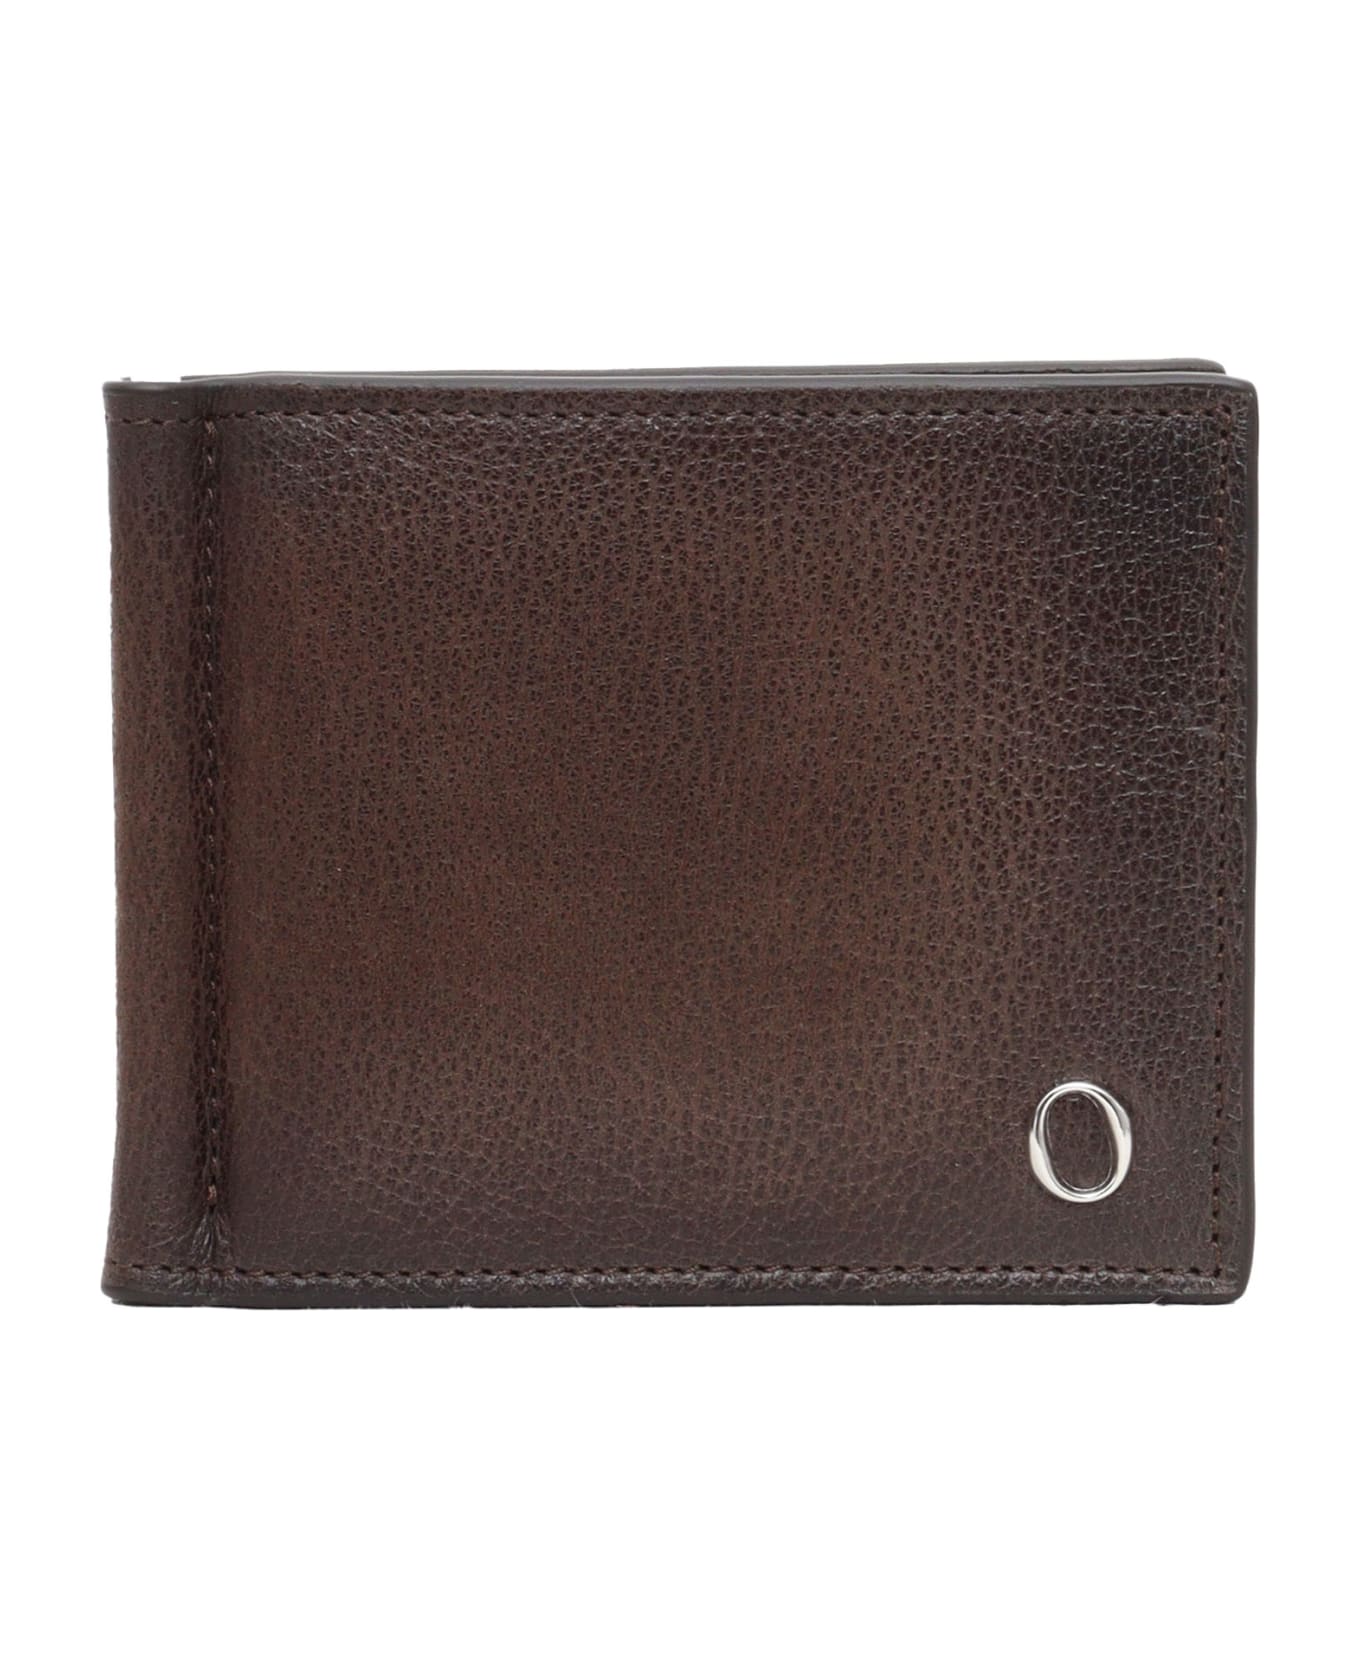 Orciani Brown Wallet - BROWN